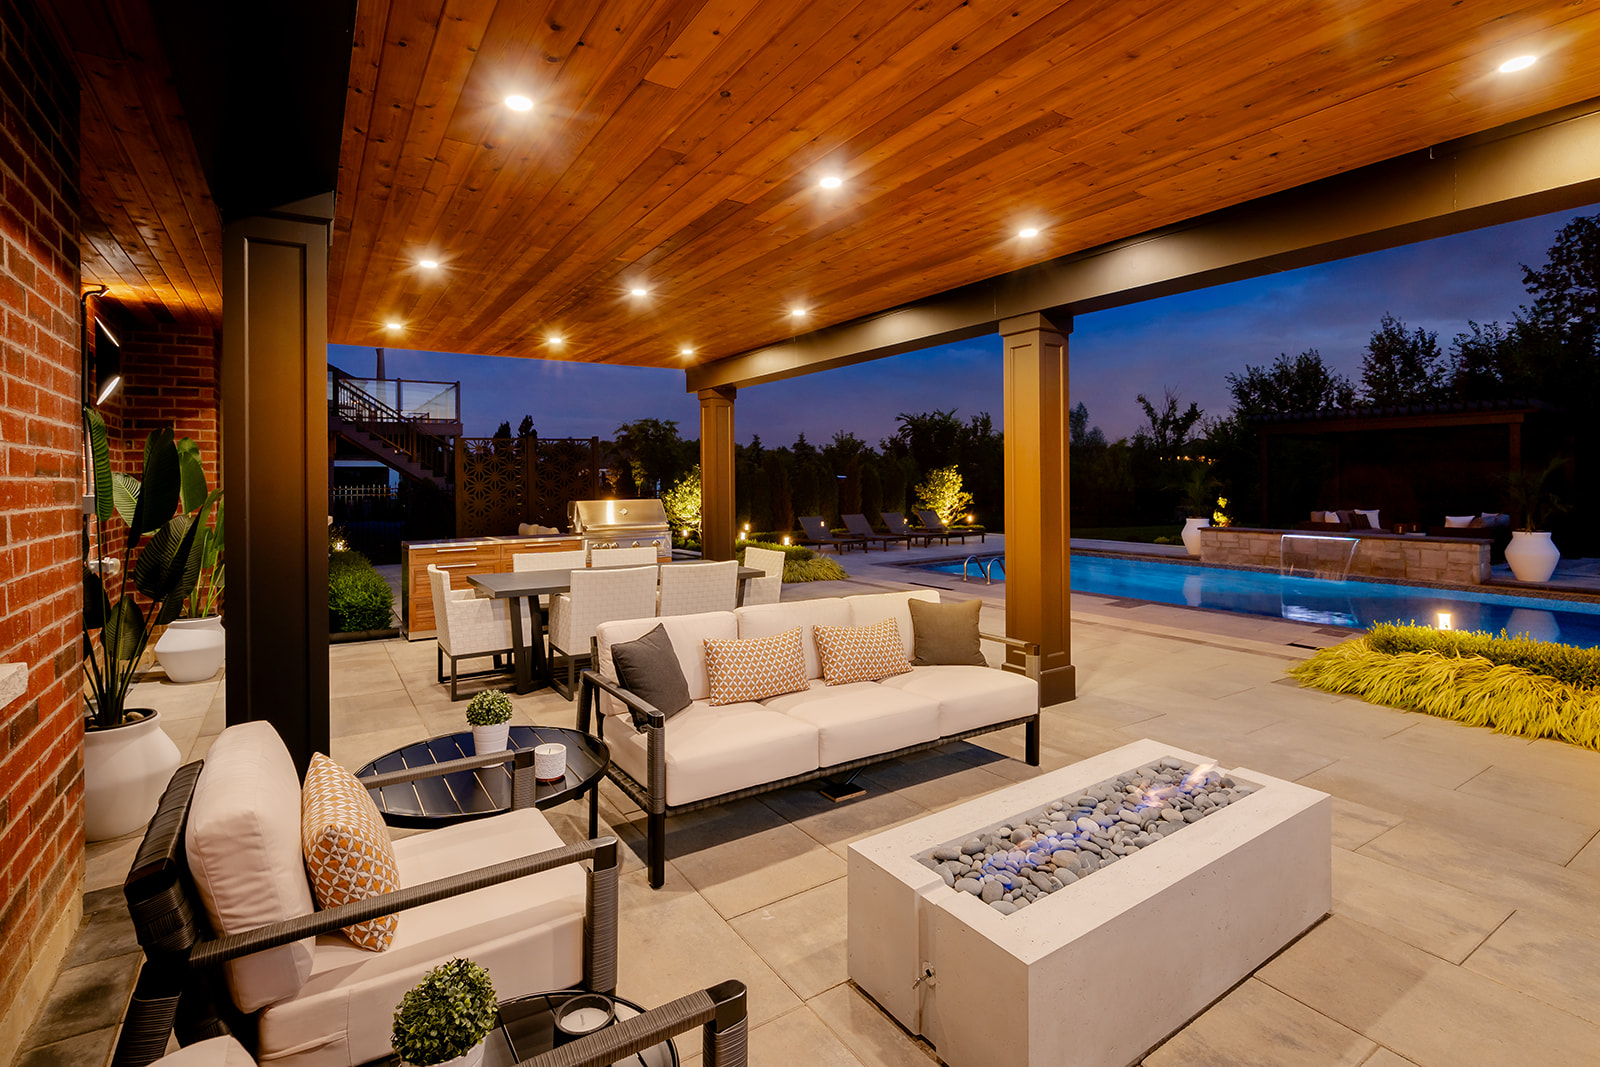 An outdoor patio set with a fireplace in the middle and lights turned on, on the cieling.